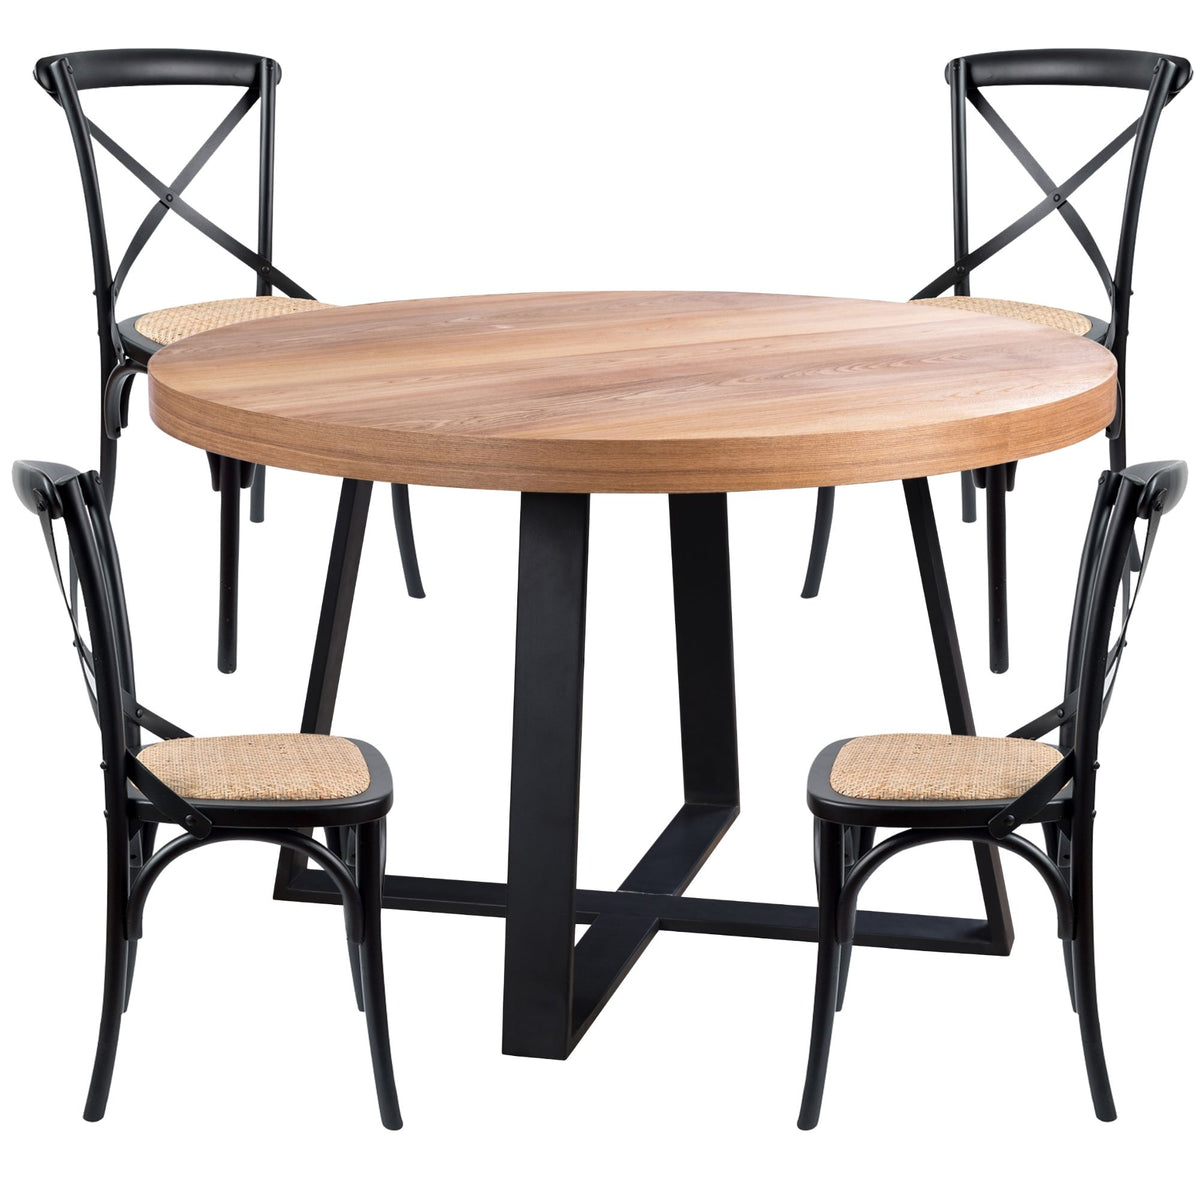 Petunia  5pc 120cm Round Dining Table Set 4 Cross Back Chair Elm Timber Wood